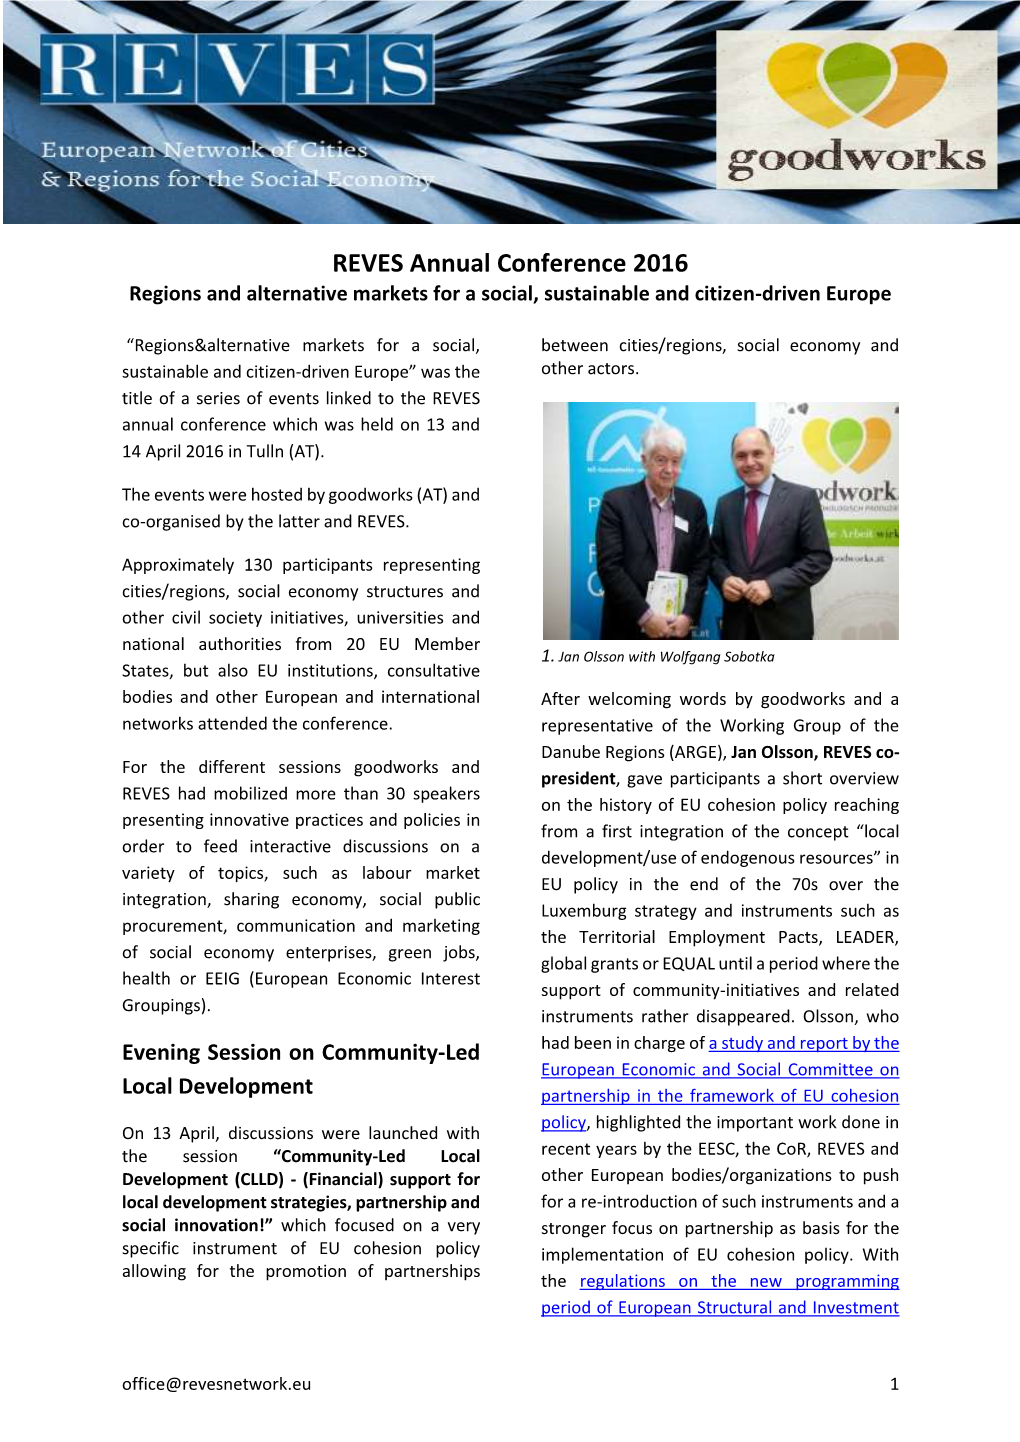 REVES Annual Conference 2016 Regions and Alternative Markets for a Social, Sustainable and Citizen-Driven Europe